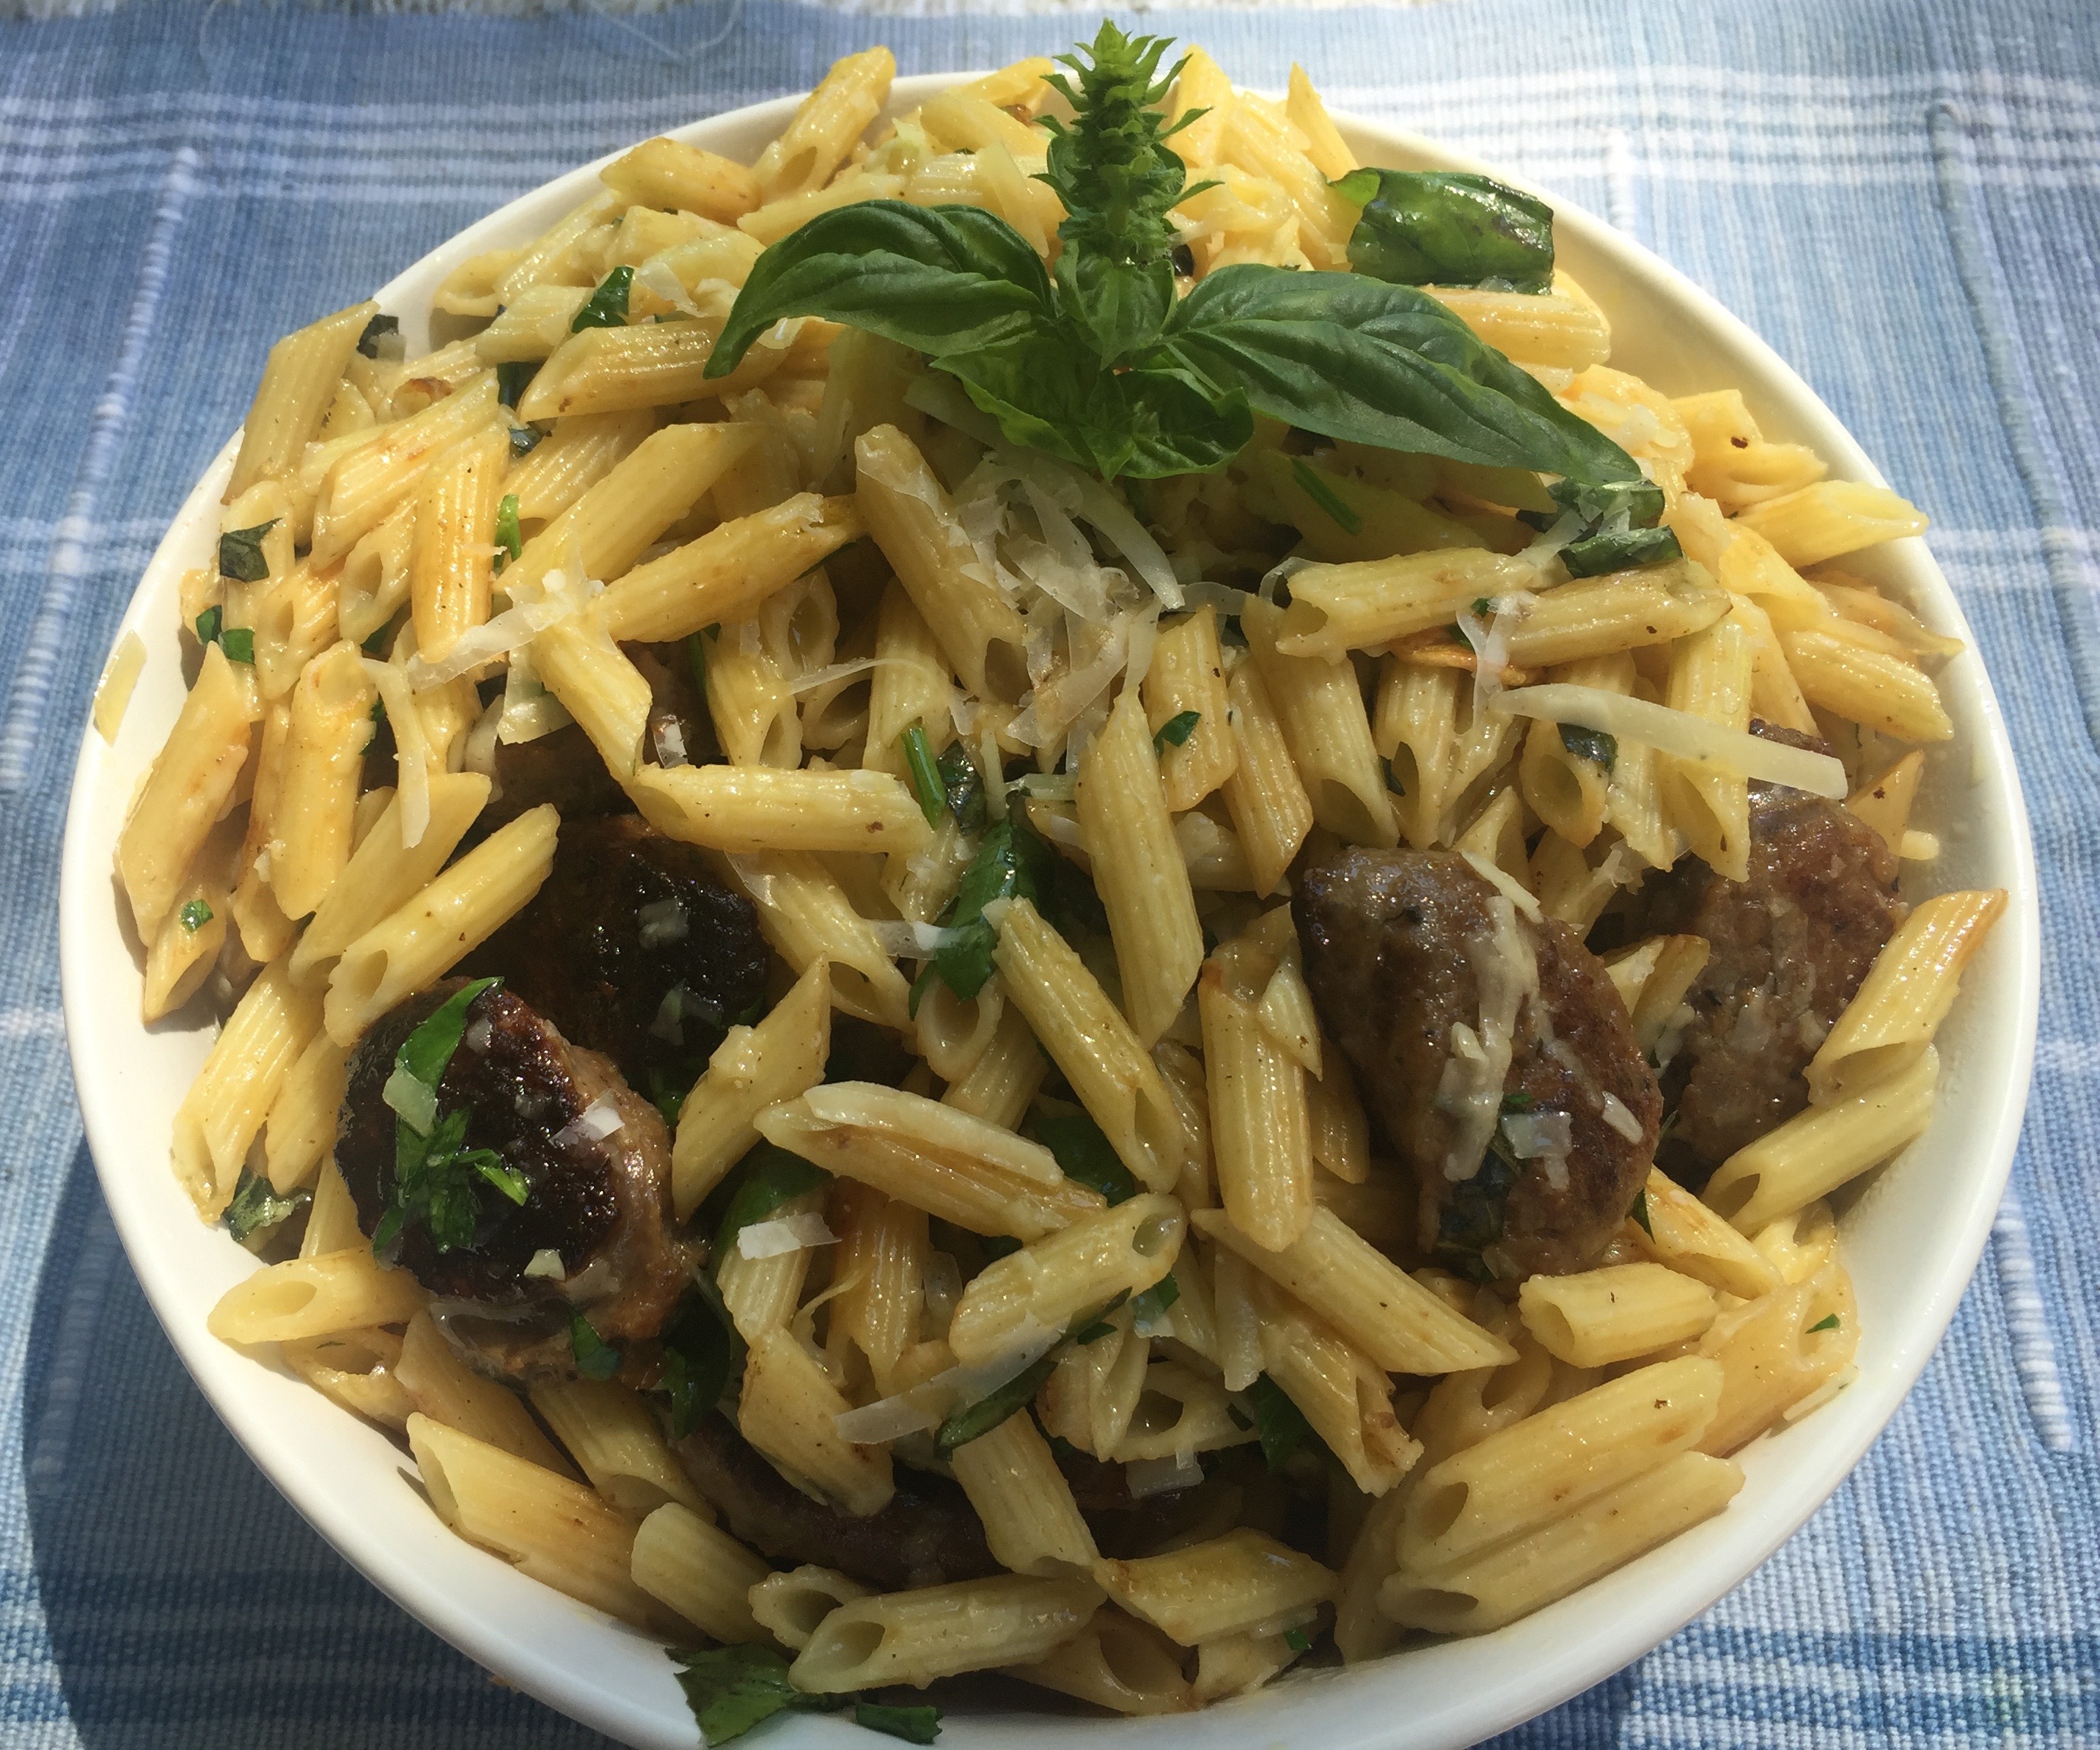 Pasta with Sausage, Olive Oil, Garlic and Fresh Herbs – Impromptu